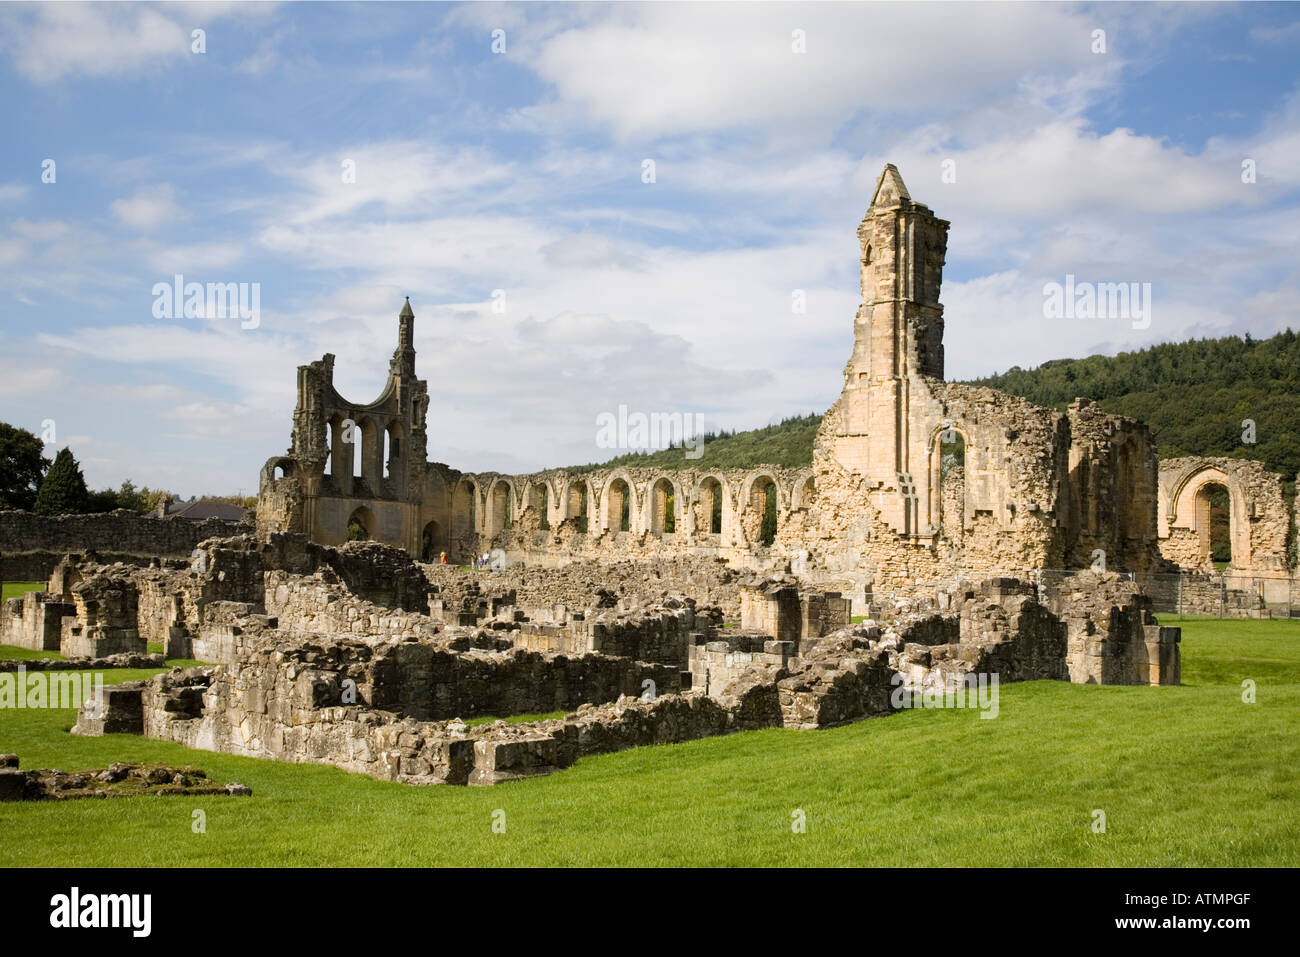 Byland Abbey 12th century Cistercian ruins in North York Moors "National Park". Coxwold North Yorkshire England UK Stock Photo